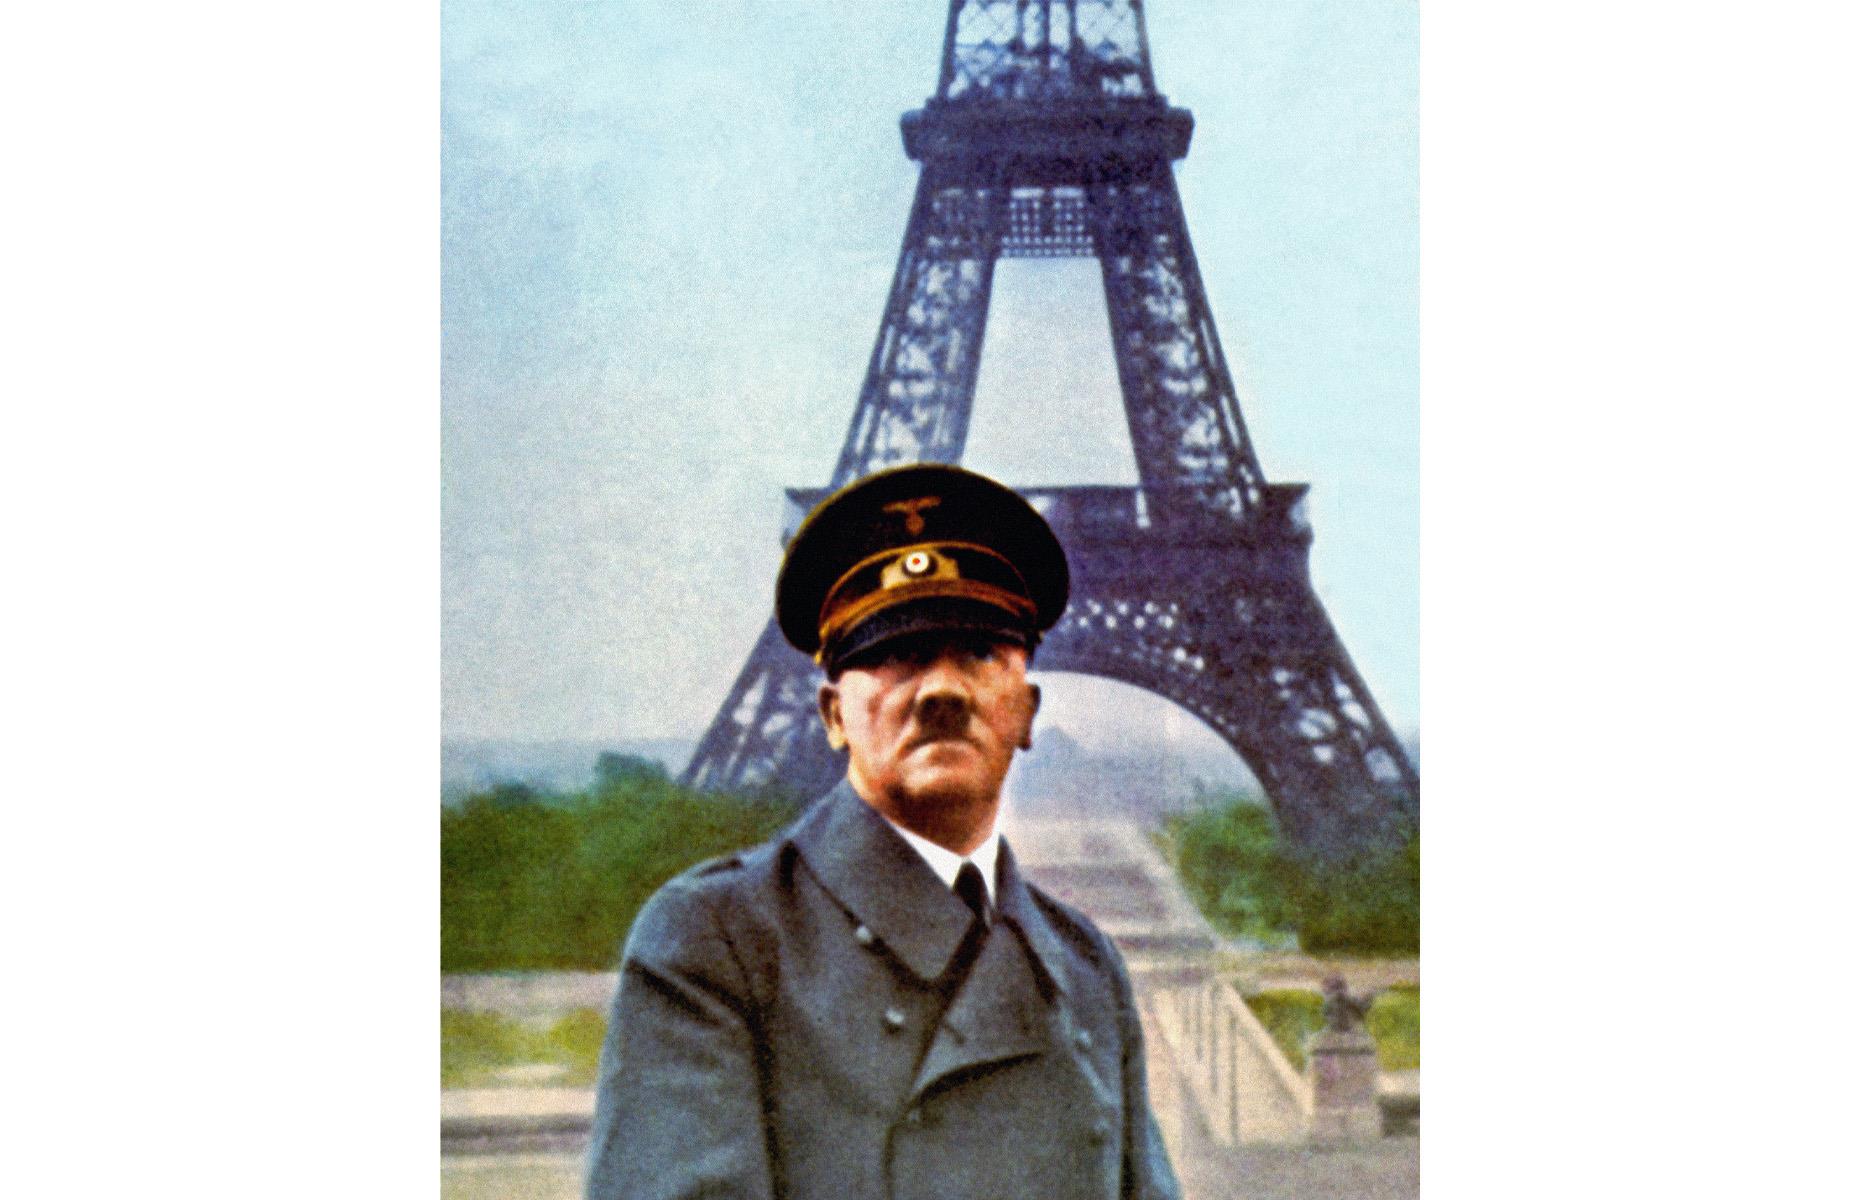 <p>Nazi leader Adolf Hitler only visited Paris once, in June 1940. It was the day after the French surrender and the signing of the Second Armistice at Compiegne and Hitler made a point of being photographed in front of the city’s most famous landmarks, including the Eiffel Tower, to illustrate that his victory over France was complete.</p>